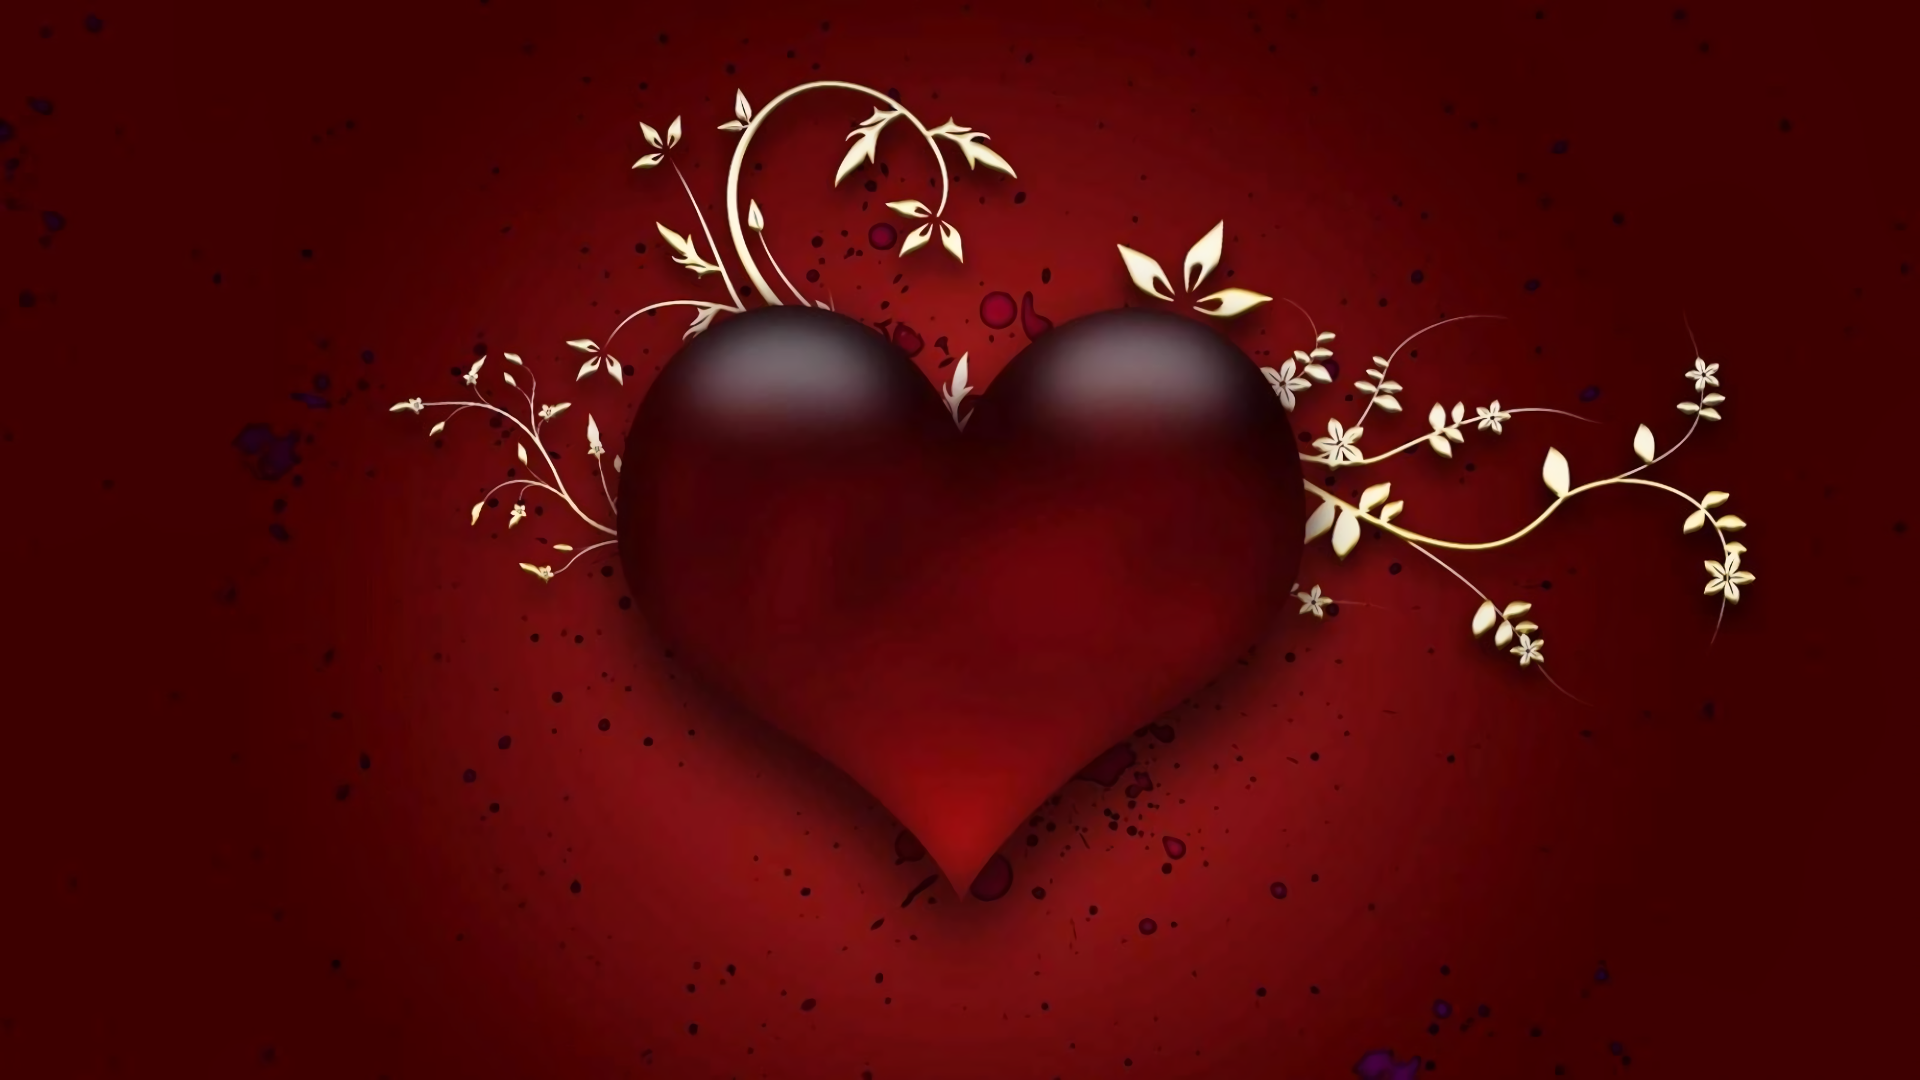 Red Heart HD Wallpaper | Background Image | 1920x1080 | ID ...